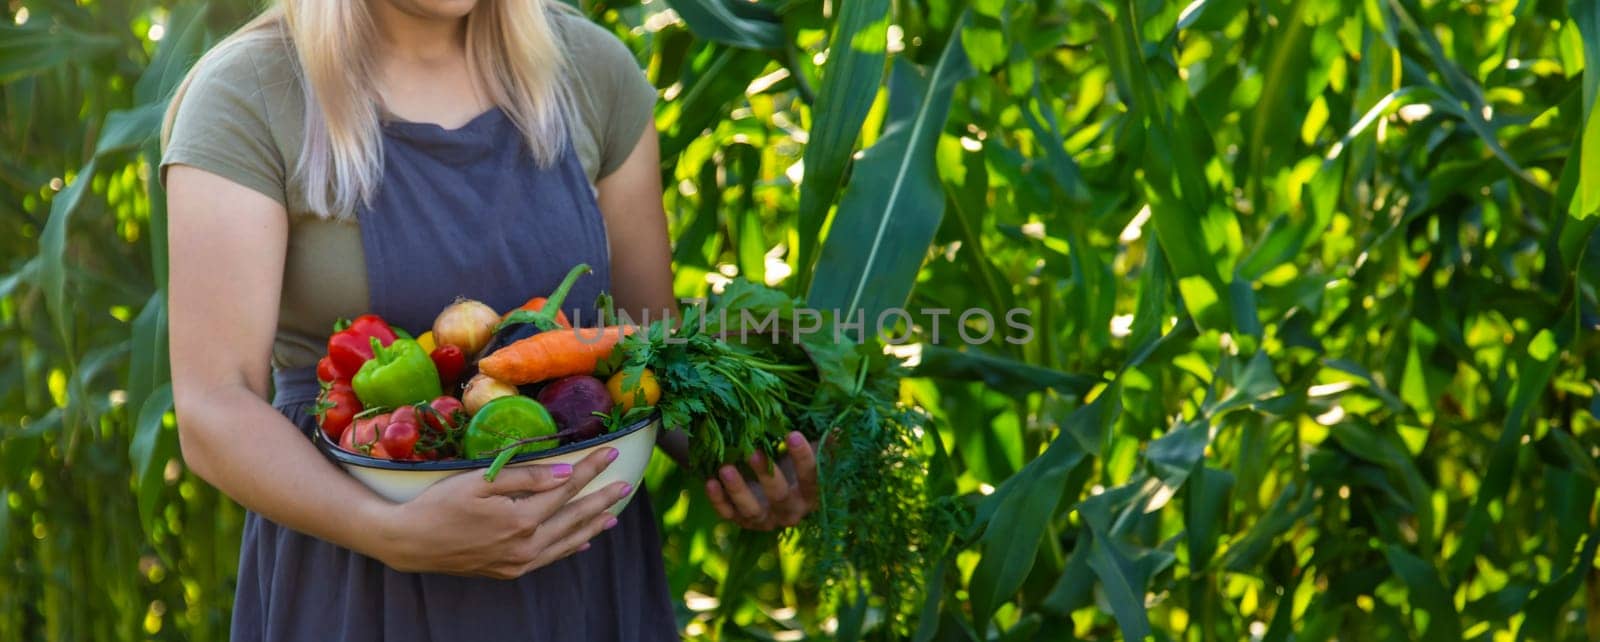 woman in the garden with vegetables in her hands.